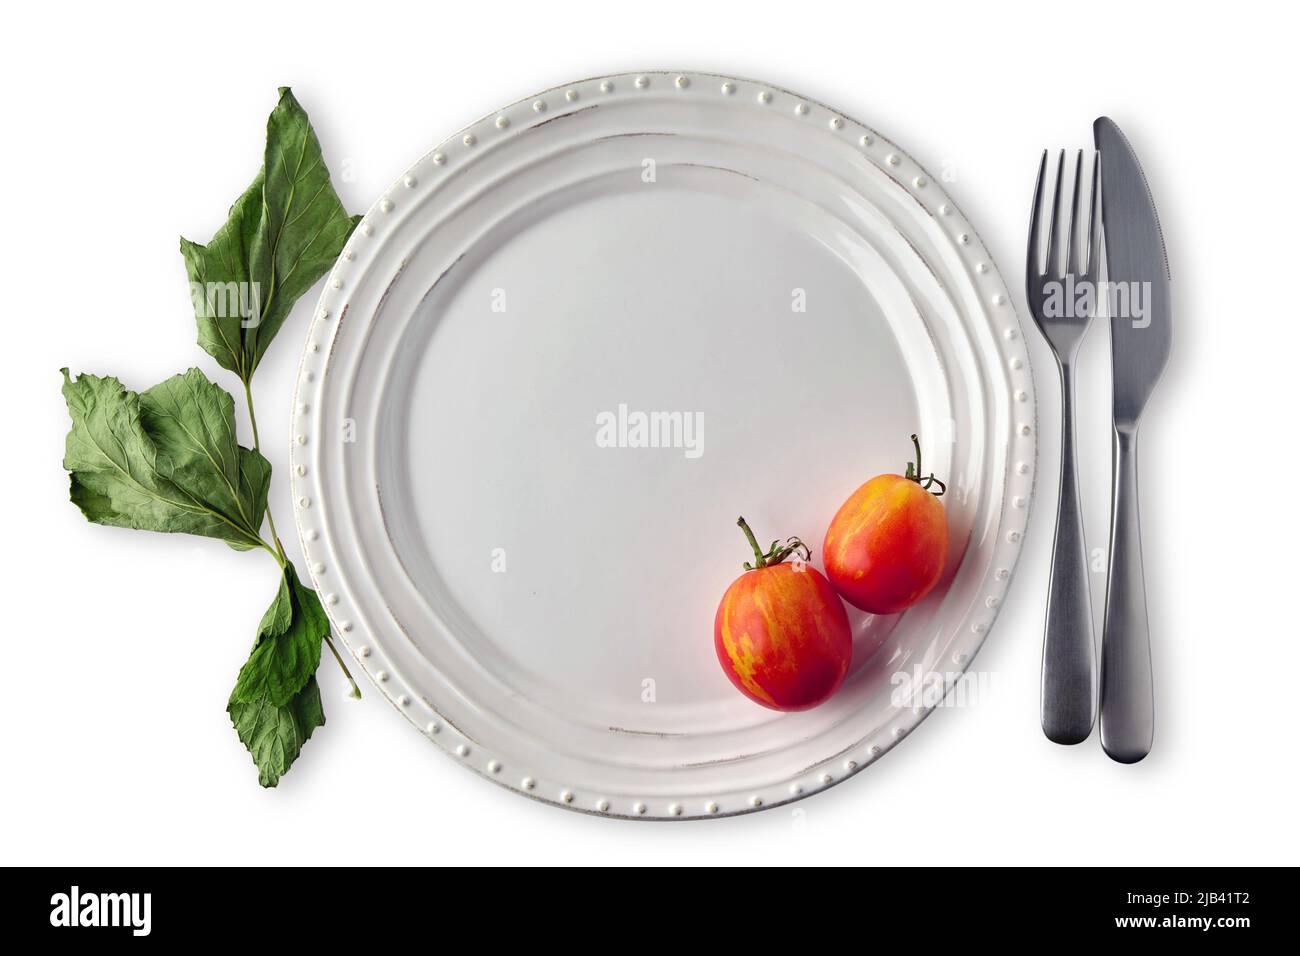 White ceramic plate decorated with dried currant leaves and tomatoes with cutlery on a white plate. Restaurant menu mockup Stock Photo